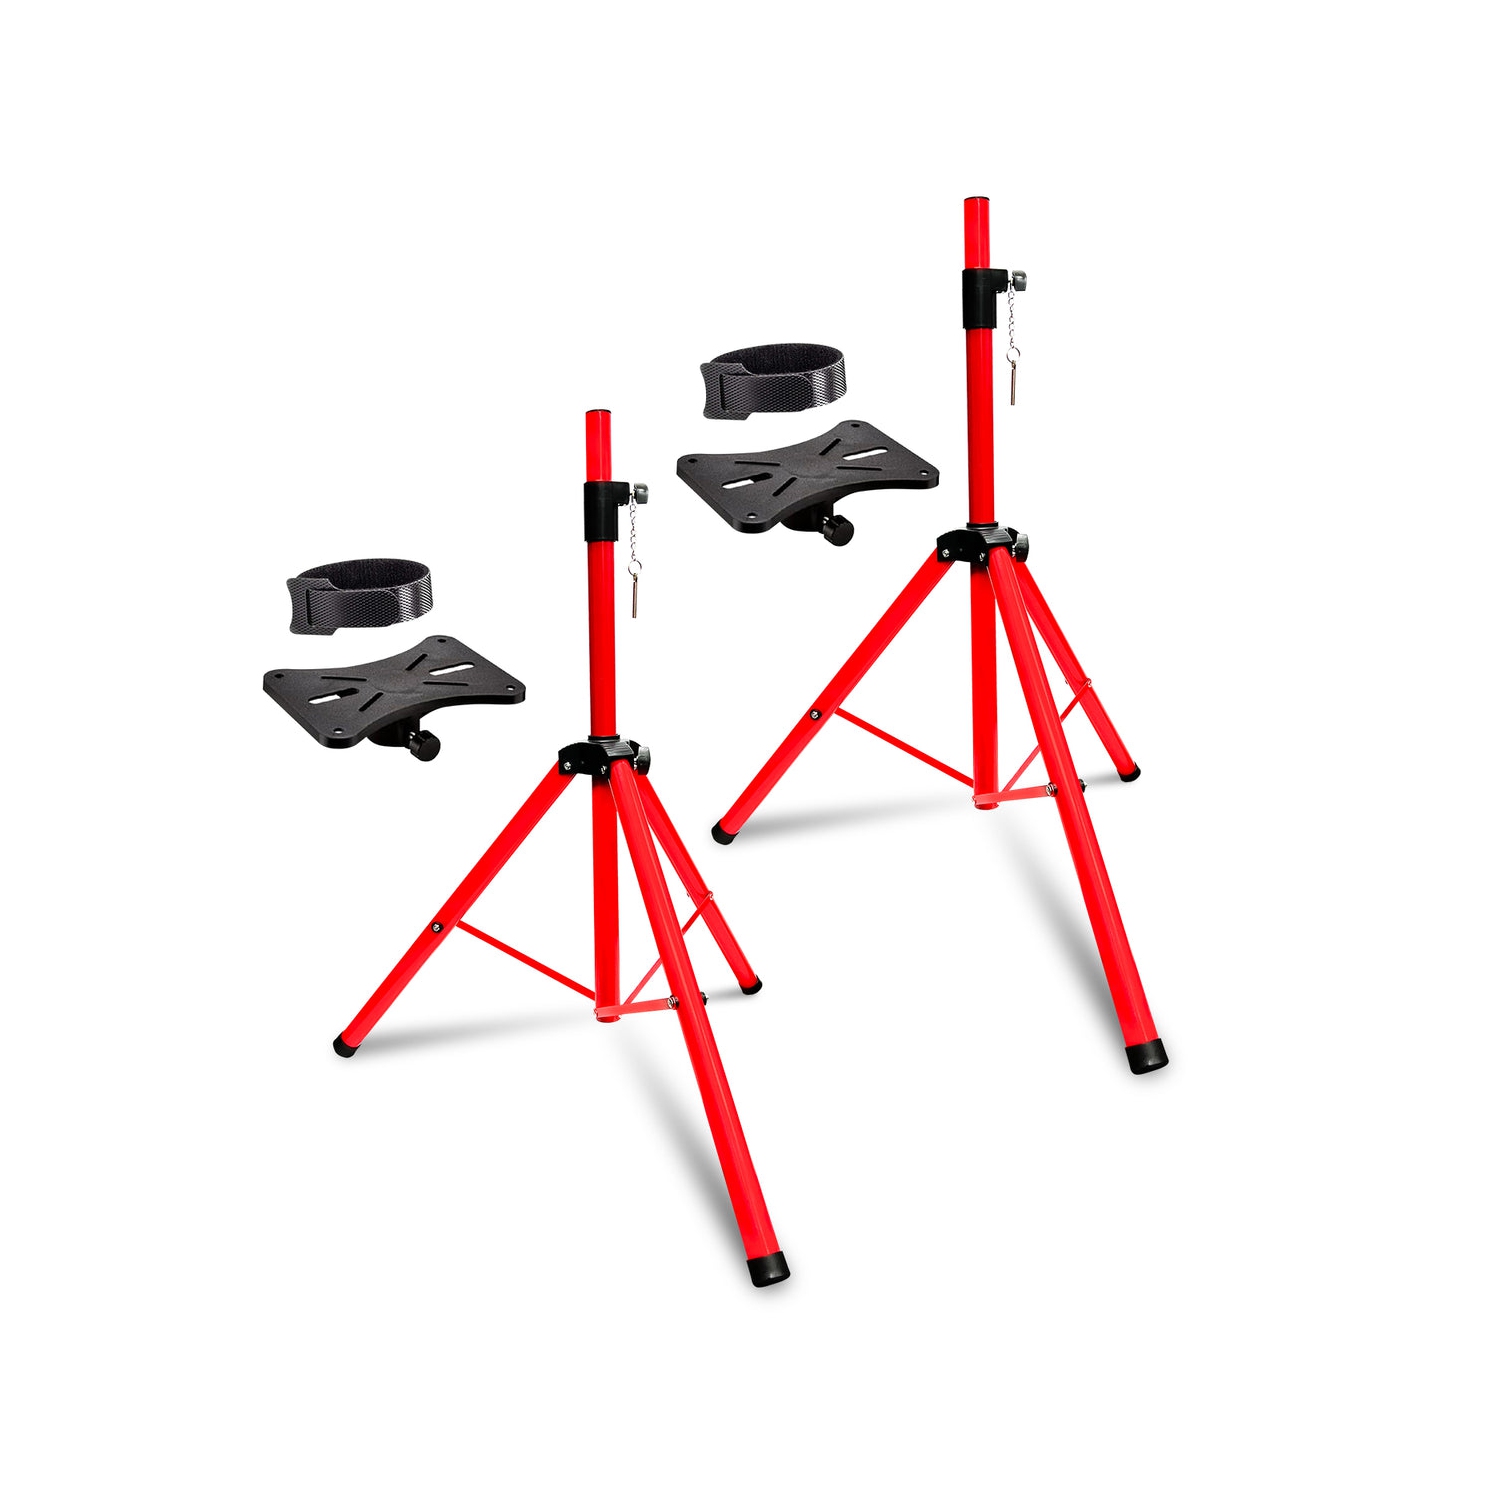 5 Core Speakers Stands 2 Piece Red Height Adjustable Tripod PA Monitor Holder for Large Speakers DJ Stand Para Bocinas - SS ECO 2PK RED WoB